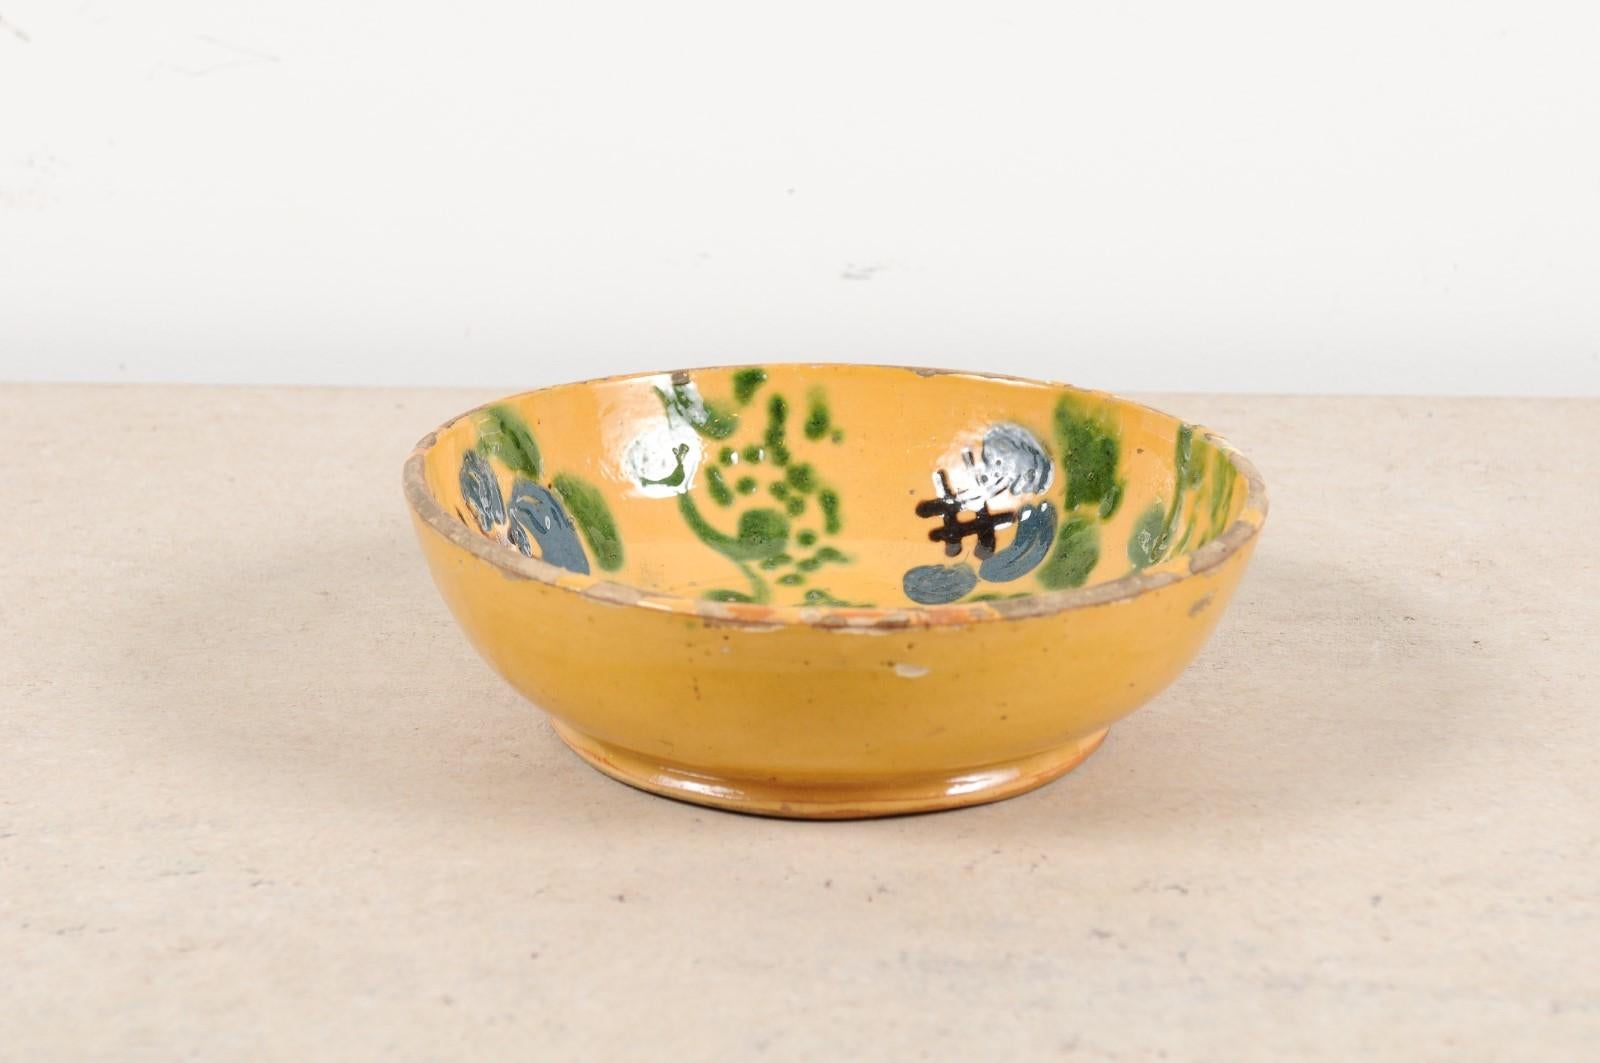 A French jaspe pottery bowl from the 19th century, with green and blue accents and crosshatched motifs. Charming us with its mustard glazed ground highlighted with blue and green abstract accents as well as crosshatched patterns, this French 19th